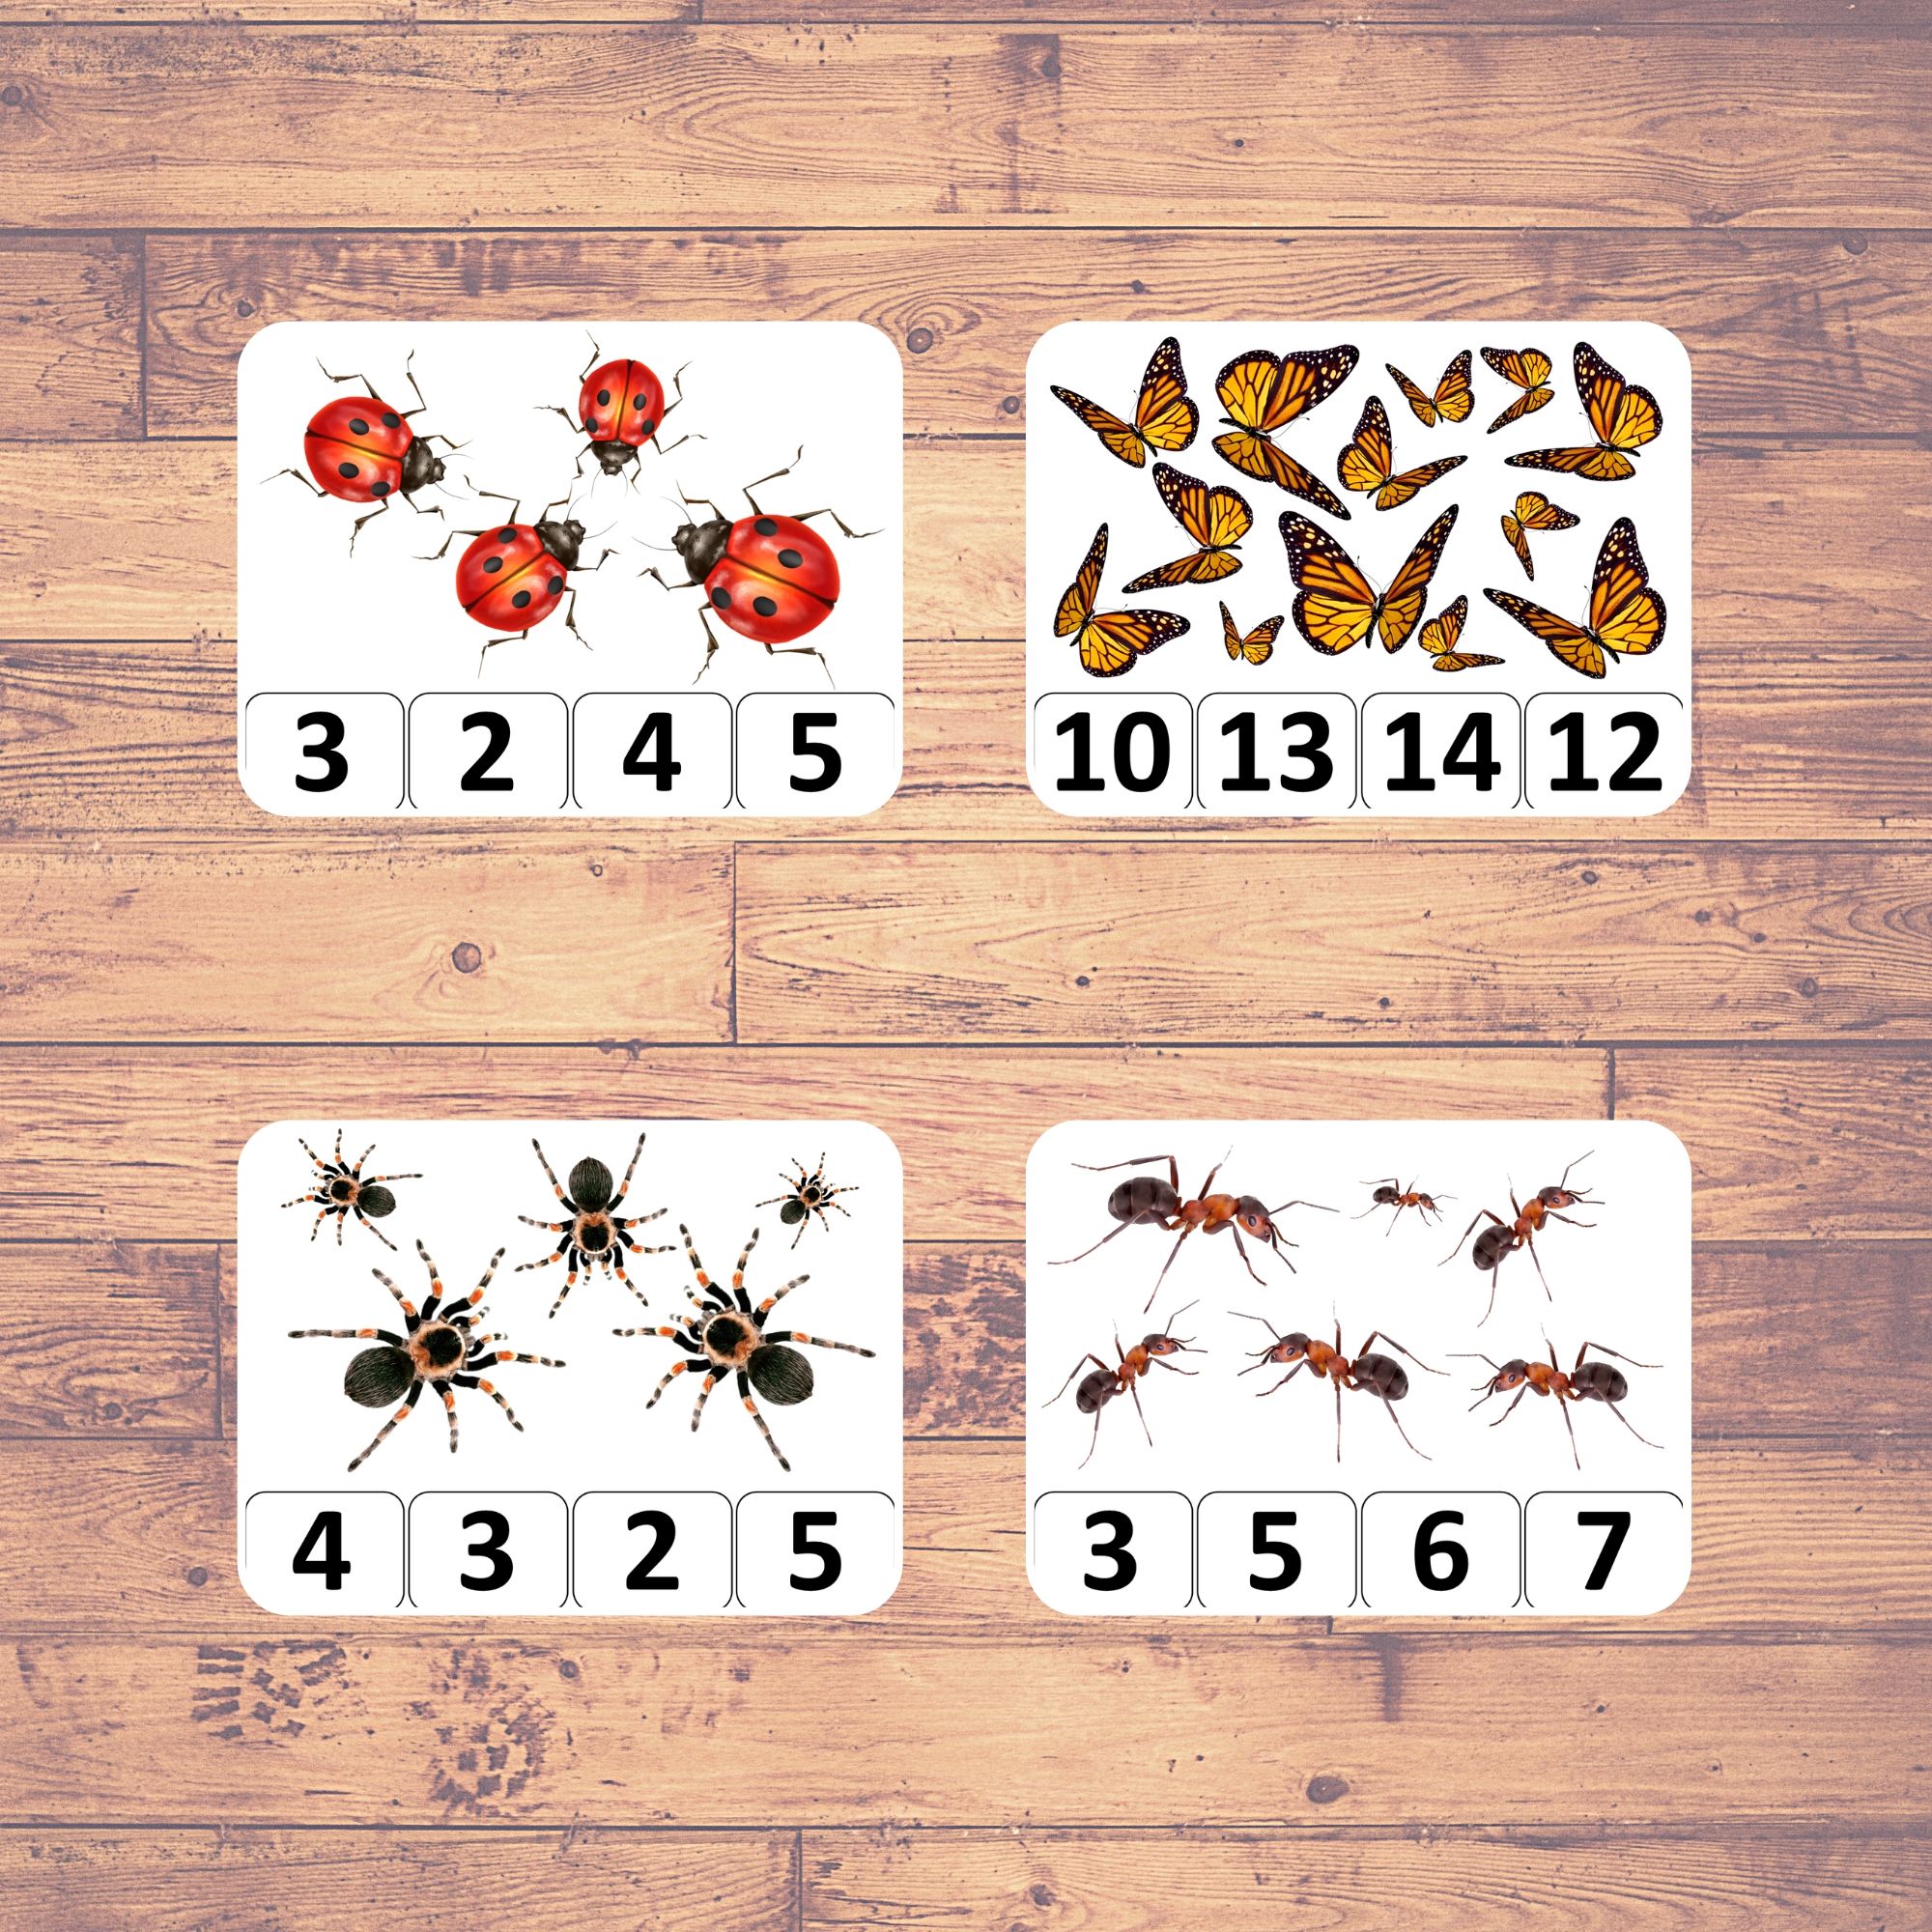 COUNTING INSECTS - Clip Counting Cards | Montessori | Educational